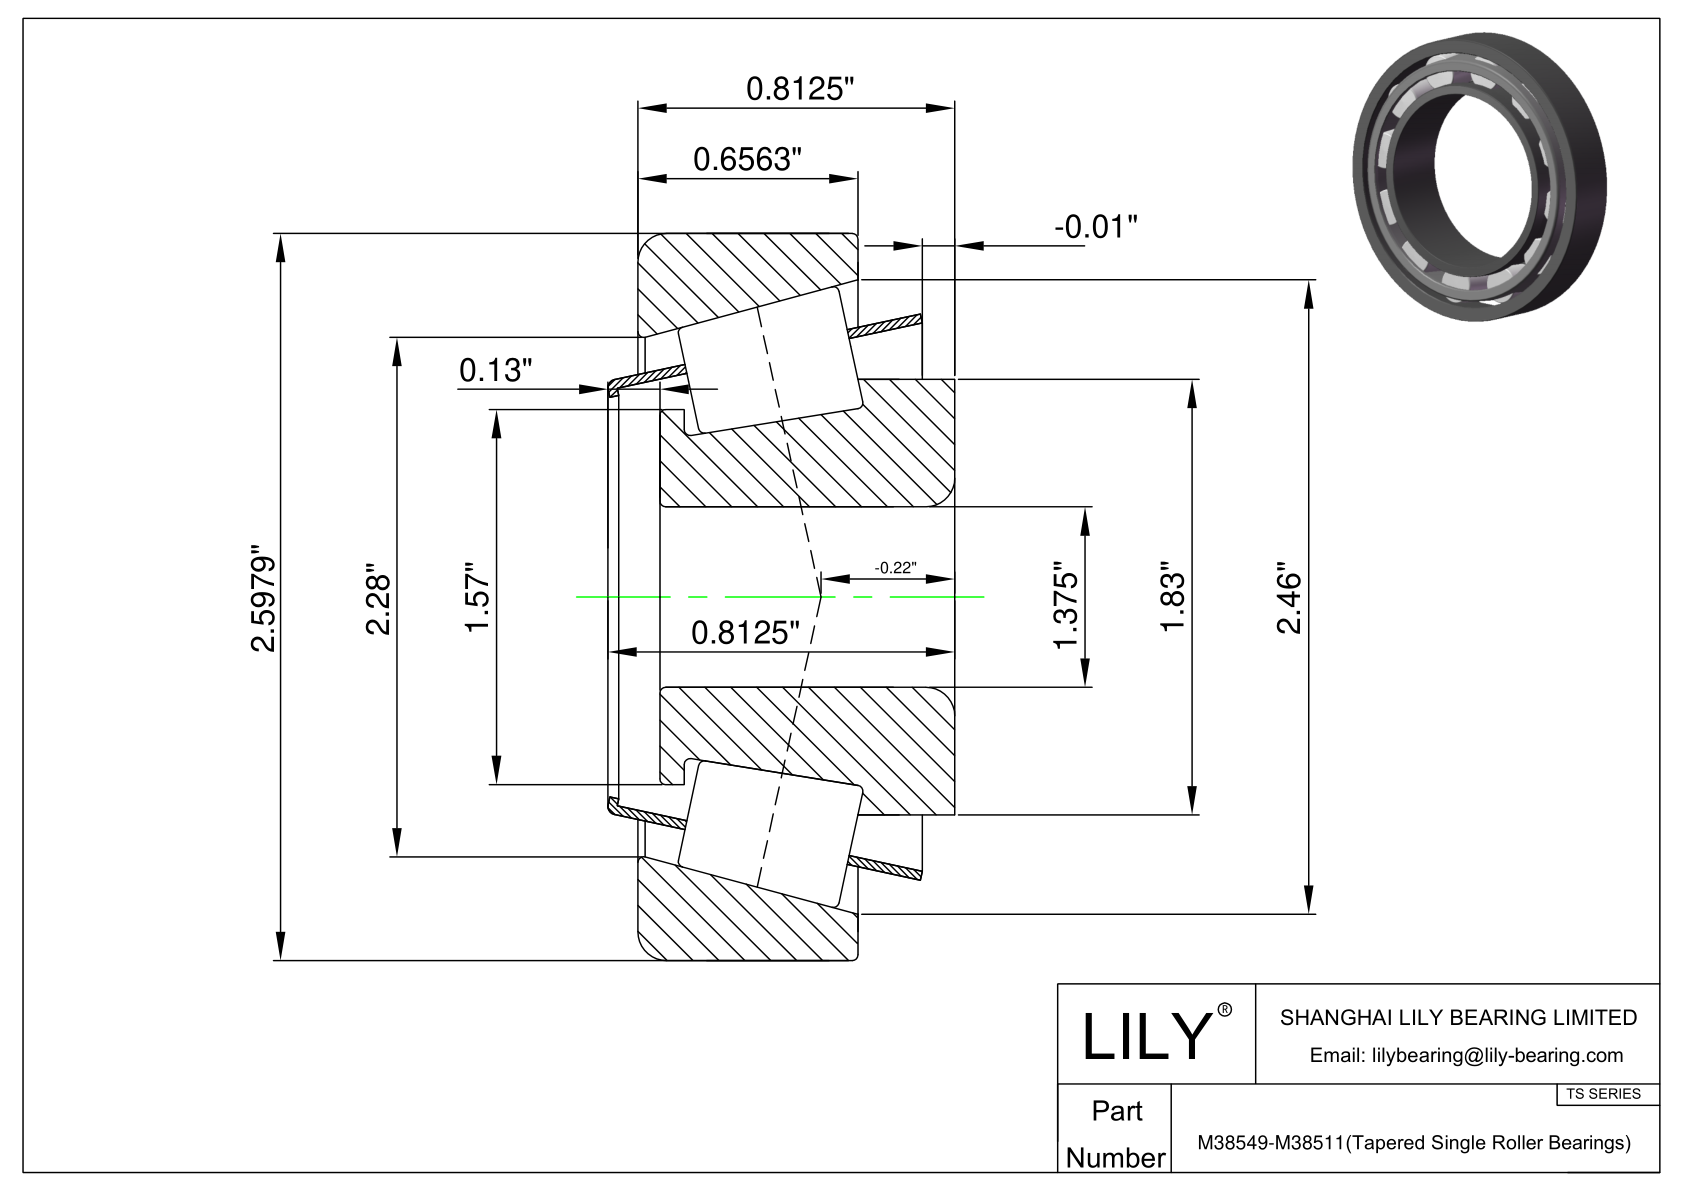 M38549-M38511 TS (Tapered Single Roller Bearings) (Imperial) cad drawing